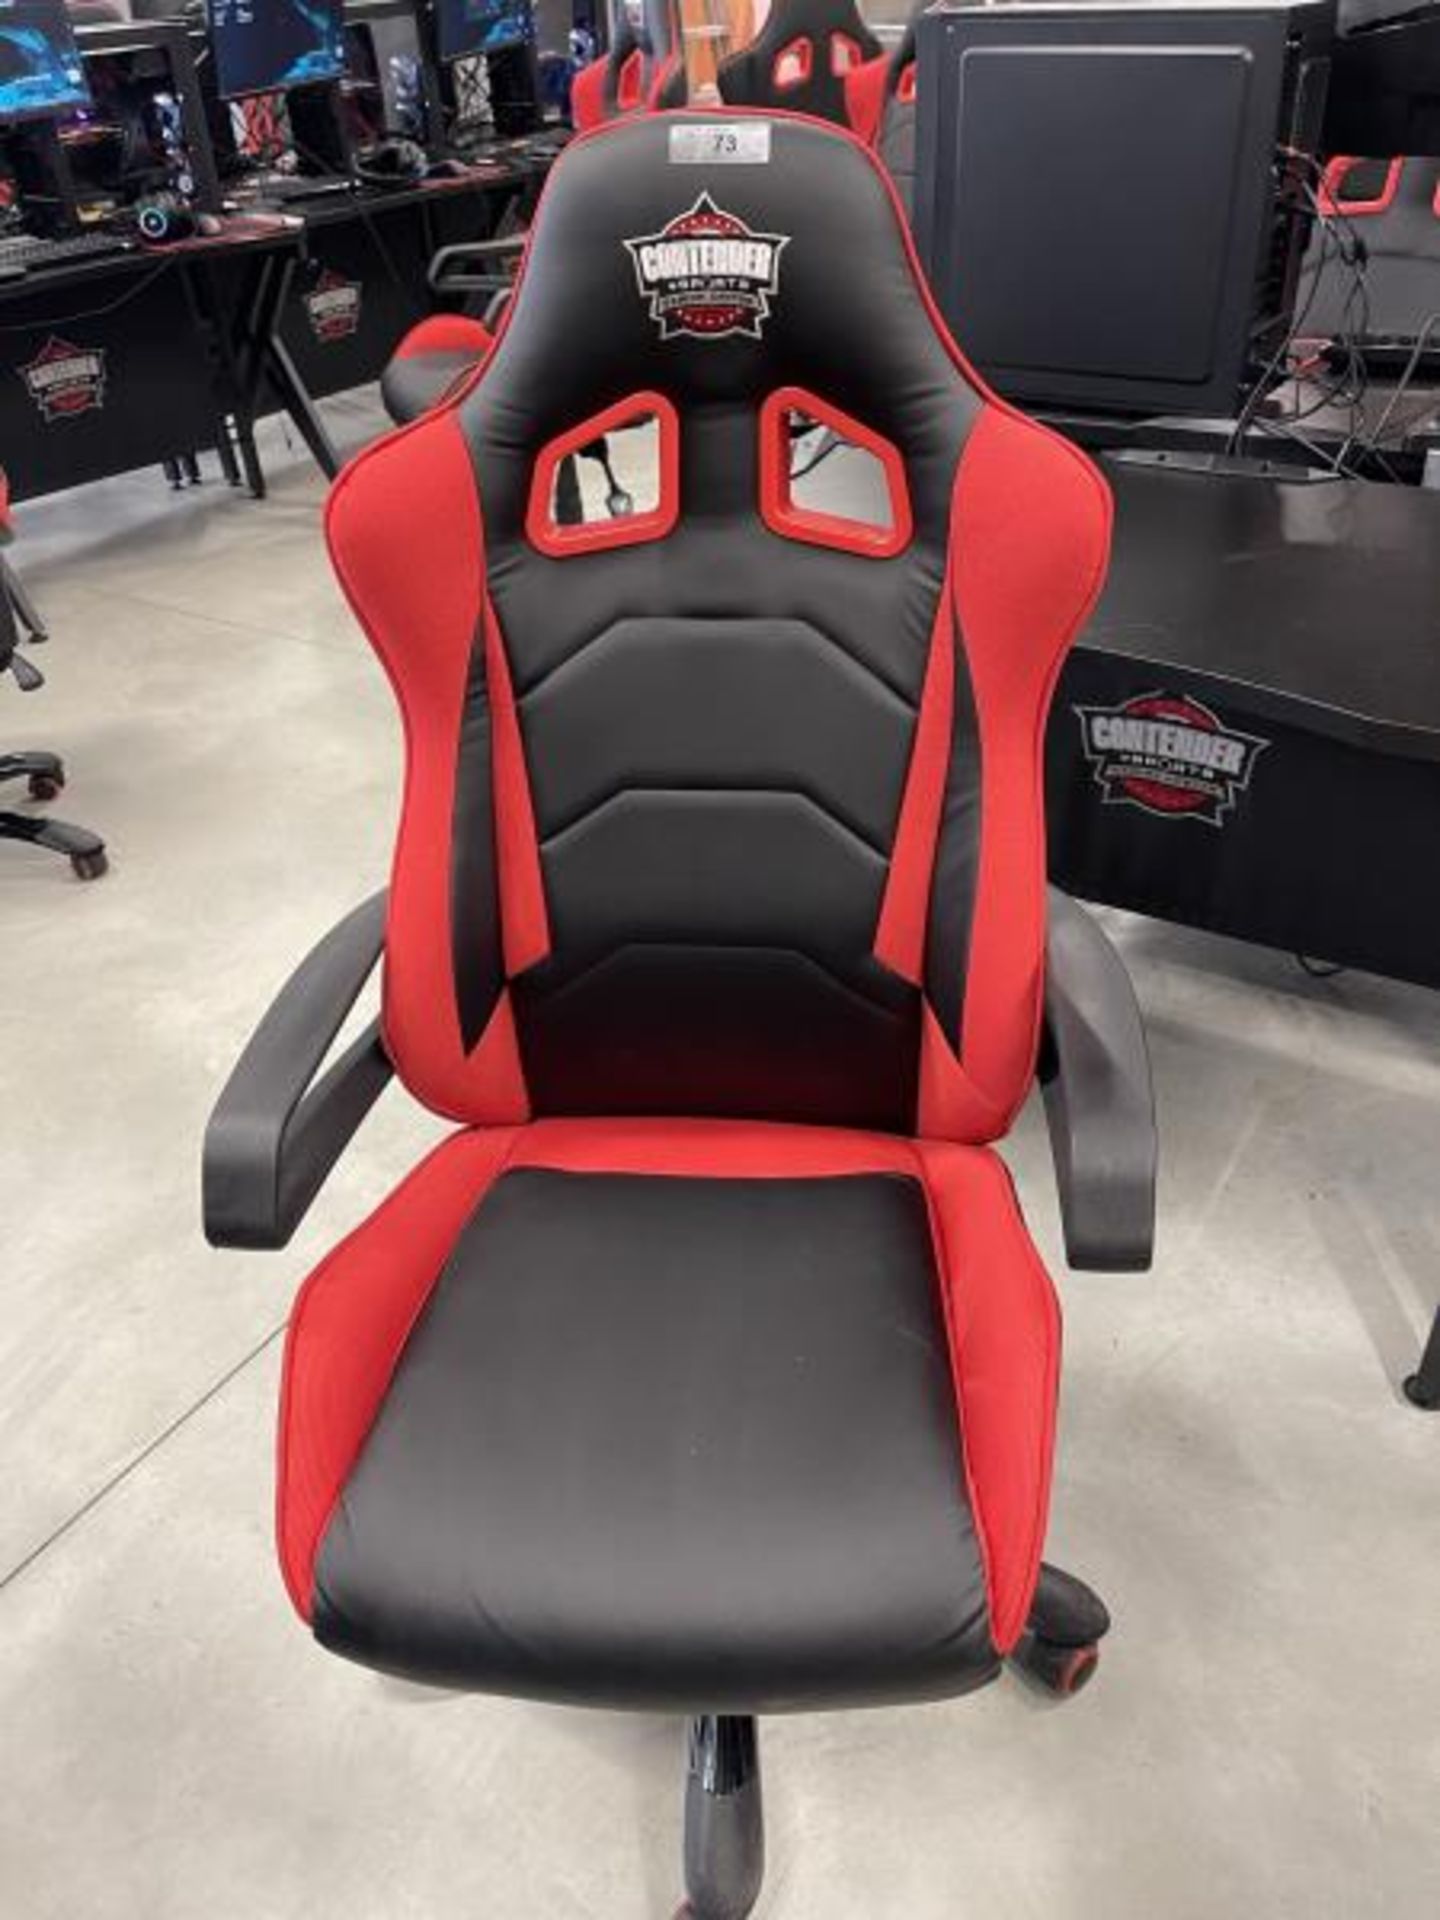 Gaming Desk 40" x 24" w/ Contender Red & Black Gaming Chair - Image 3 of 3